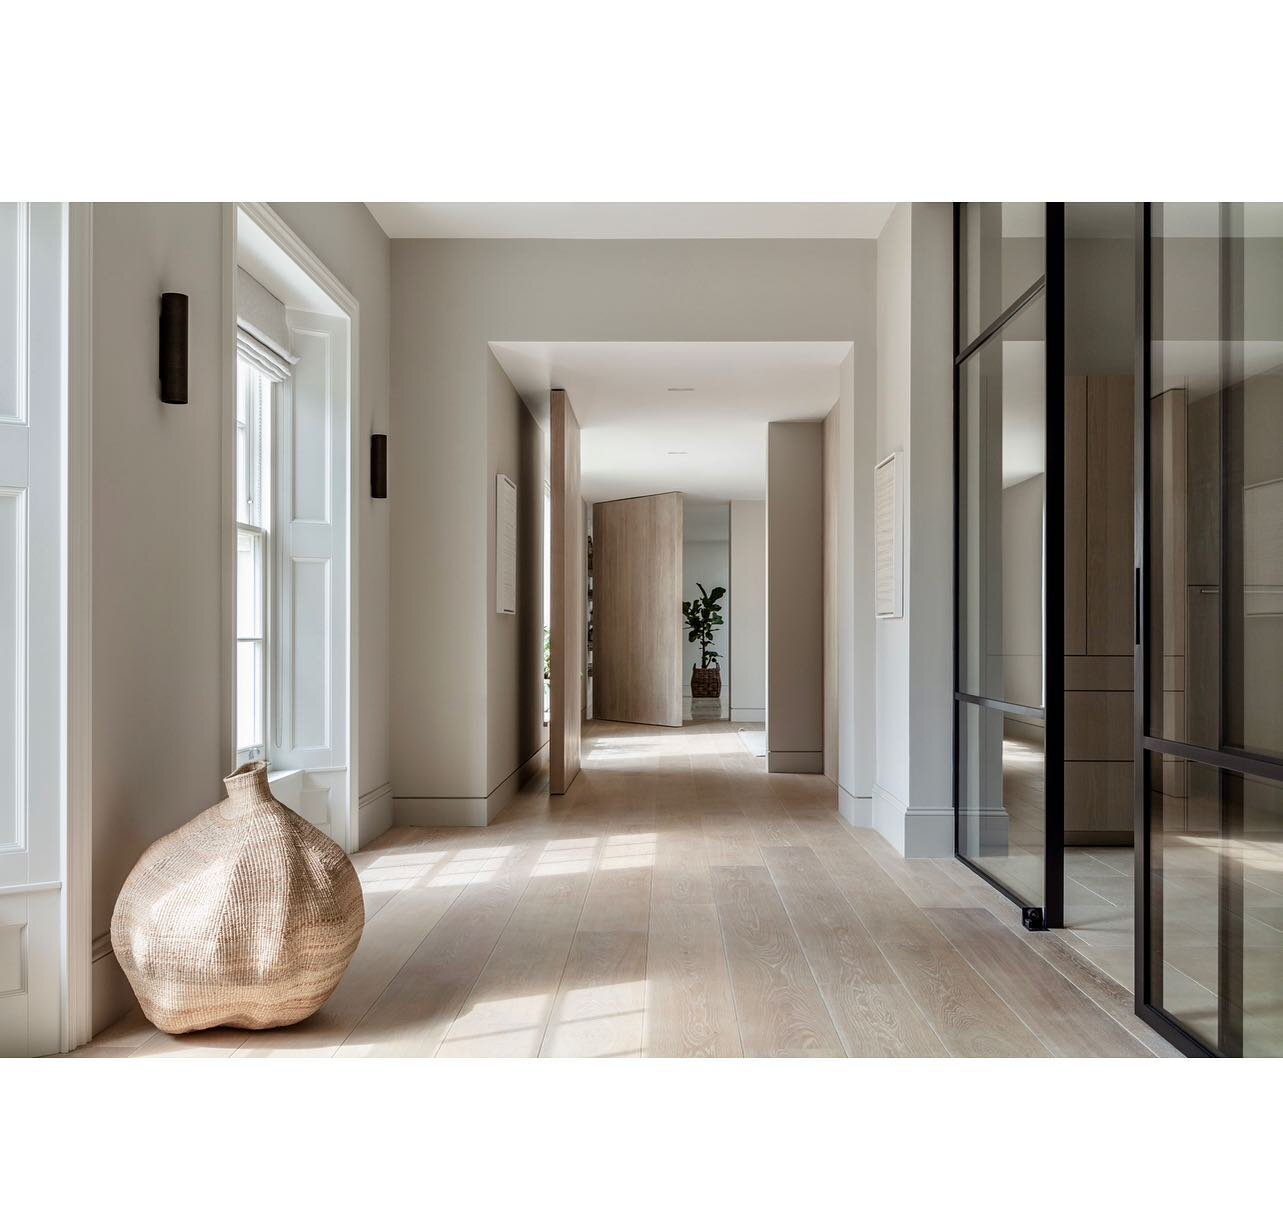 Beautiful light reflections 🌿We selected a neutral palette of natural materials to create an eminately calm feeling to the interior of this new country house @louiseholtdesign #interiordesign #interiorarchitecture #wood #bespokedesign #warmminimalis